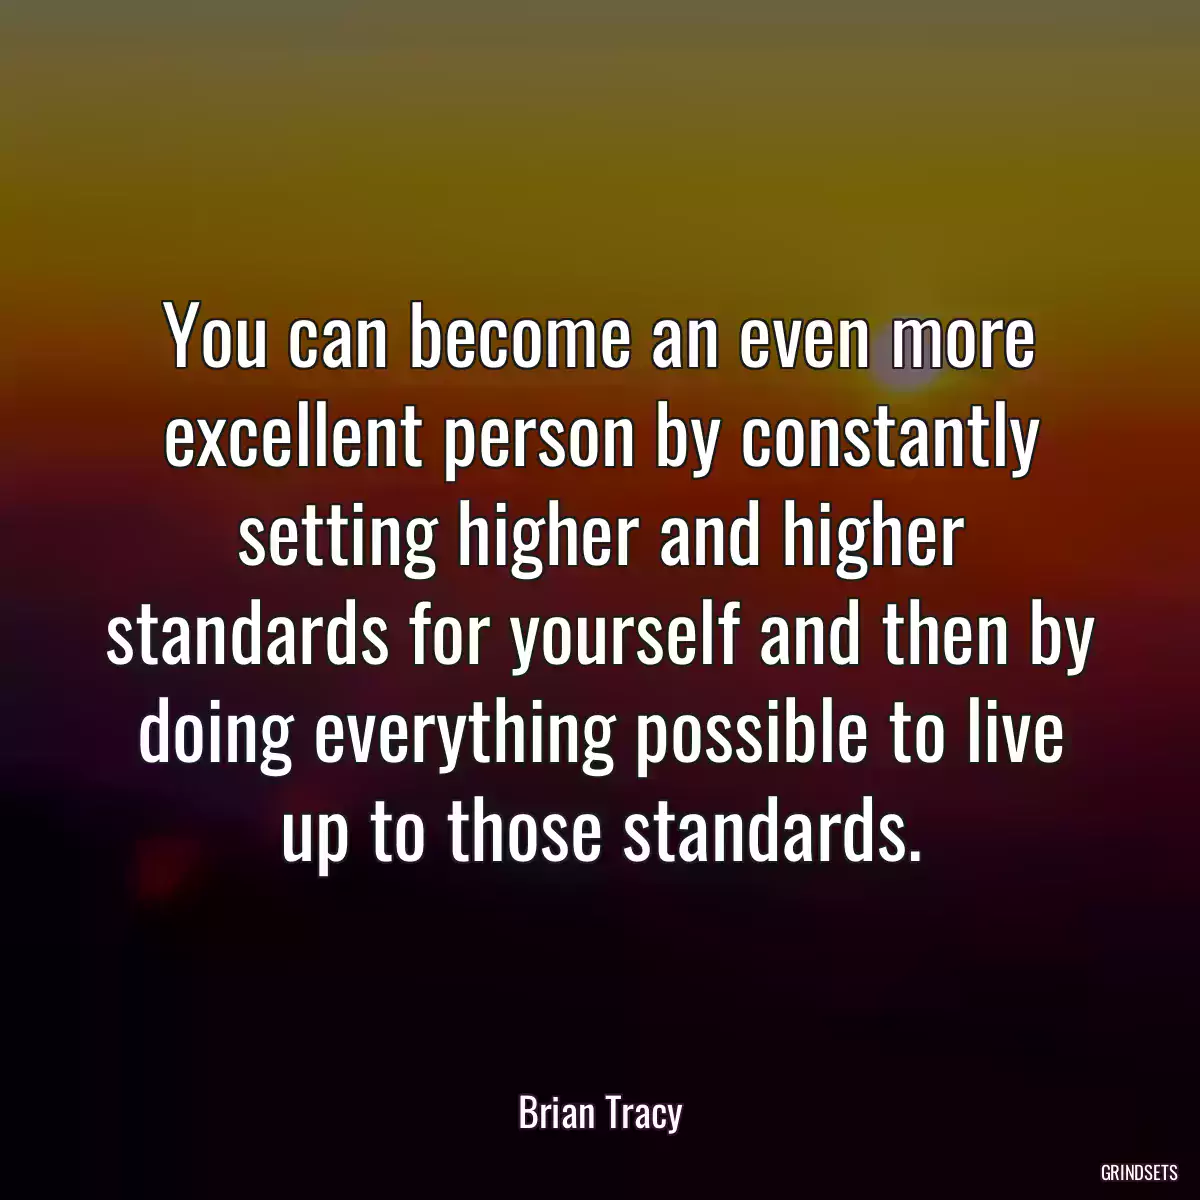 You can become an even more excellent person by constantly setting higher and higher standards for yourself and then by doing everything possible to live up to those standards.